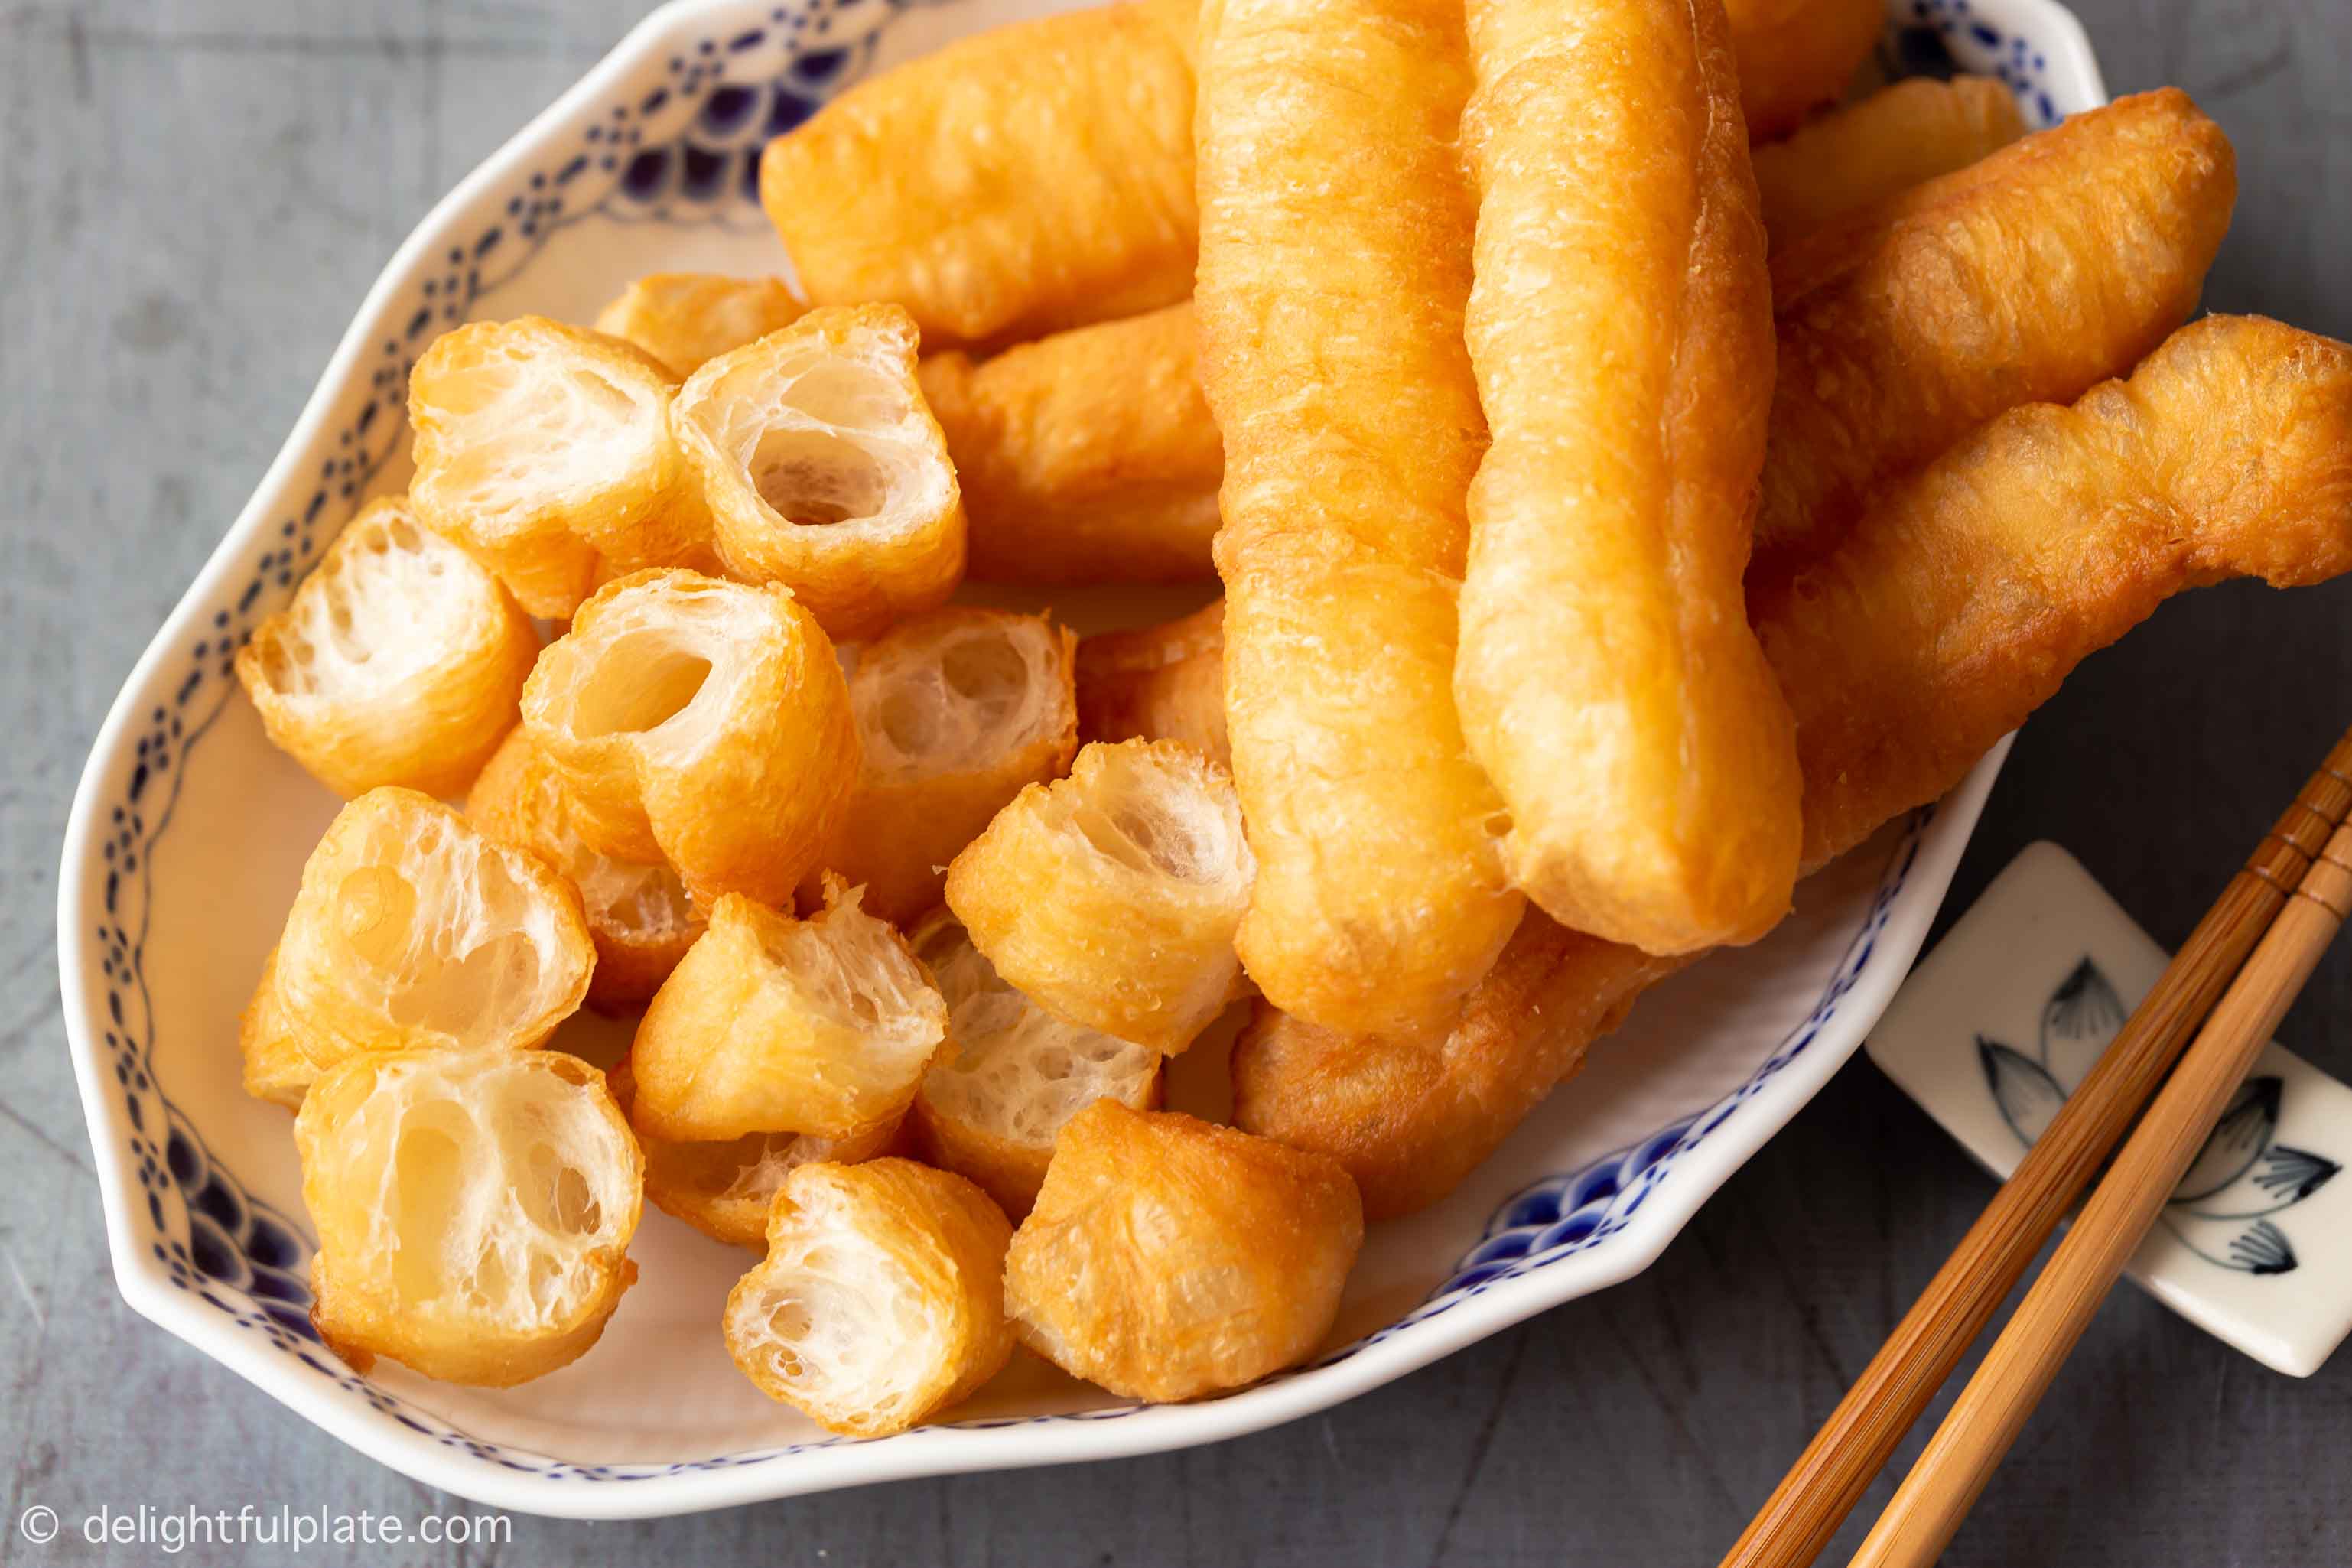 golden fried dough sticks (youtiao in Chinese and quẩy in Vietnamese) on a serving plate